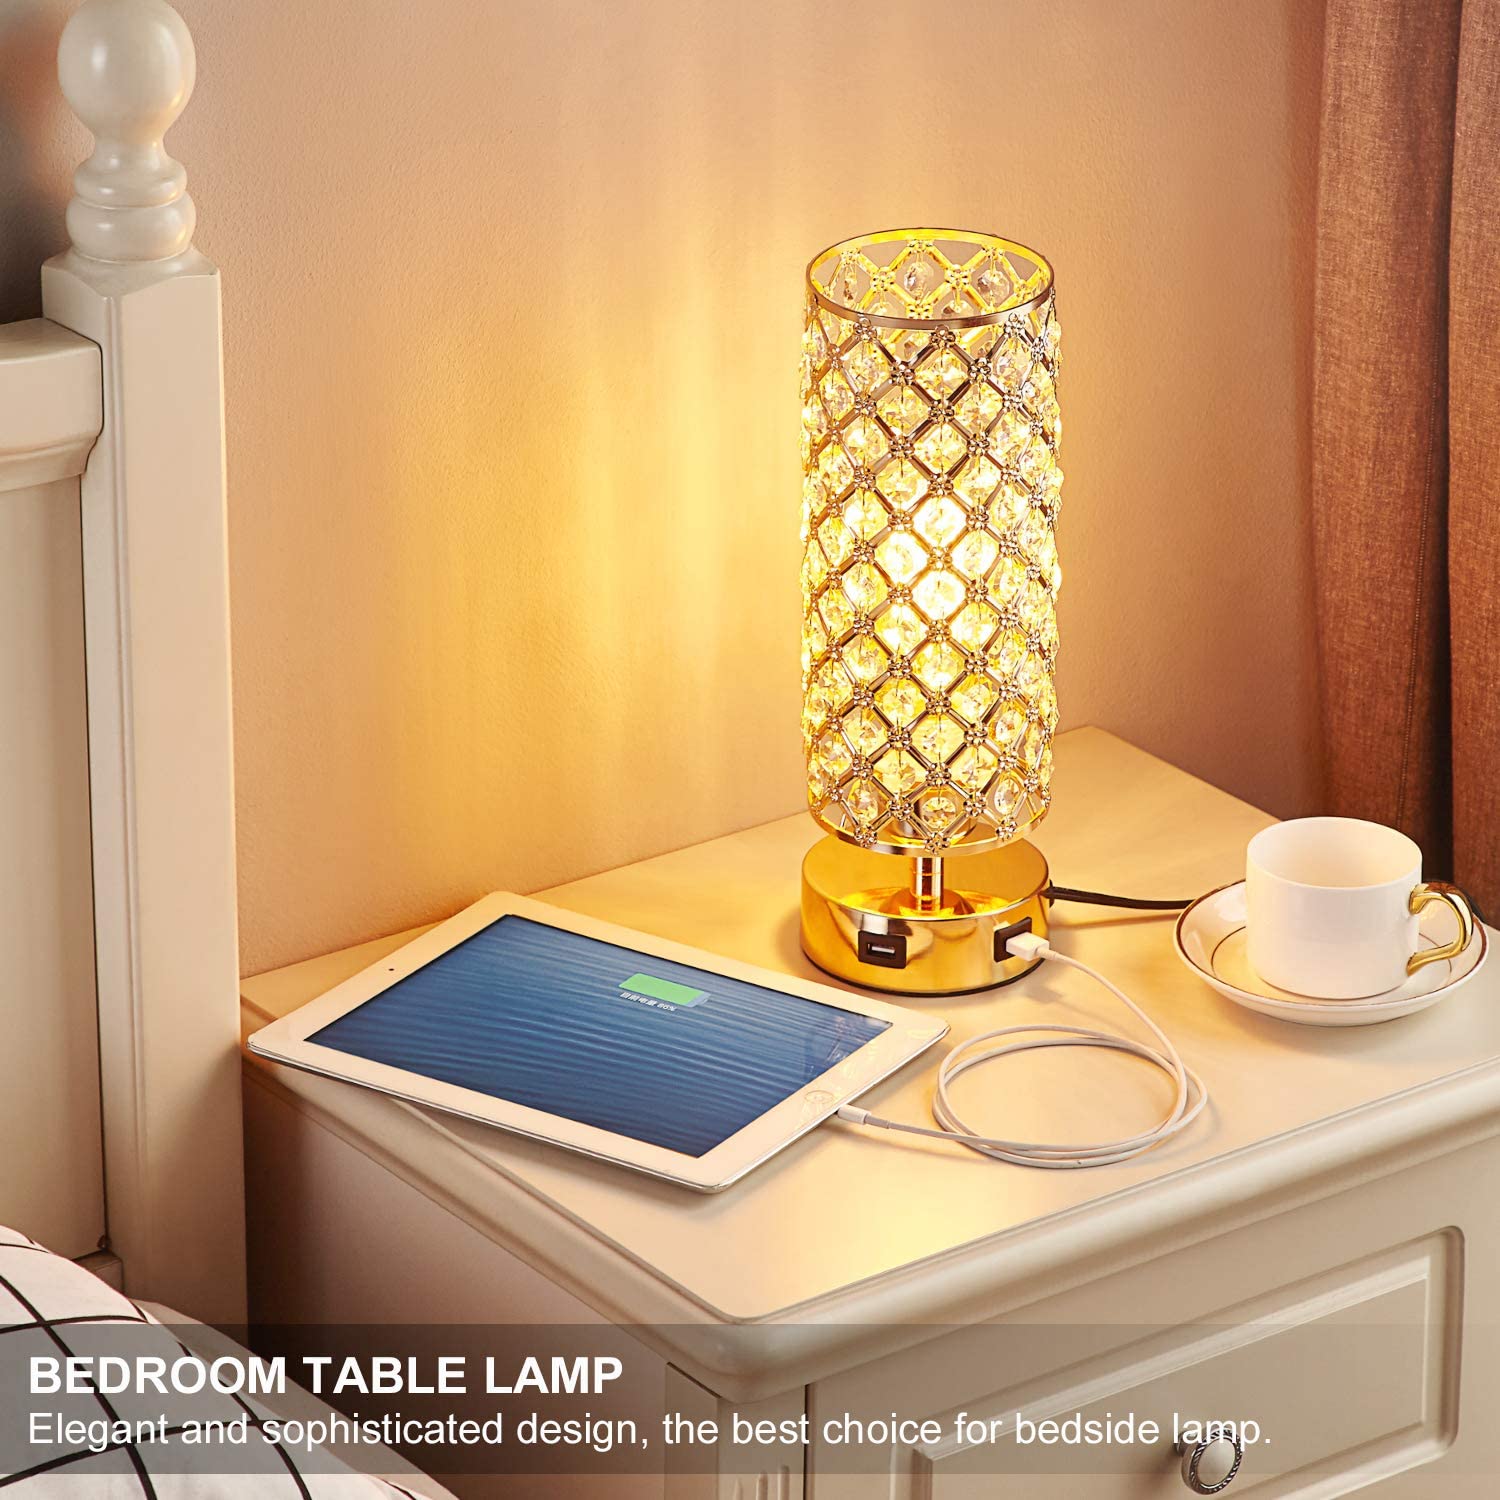 Touch Control USB Crystal Small Lamp, Dimmable Nightstand Lamp with Dual USB Port, 3-Way Gold Crystal Lamp with Bulb, Bedside Desk Light for Bedroom Living Room Entryway Home Office(Bulb Included) - image 2 of 7